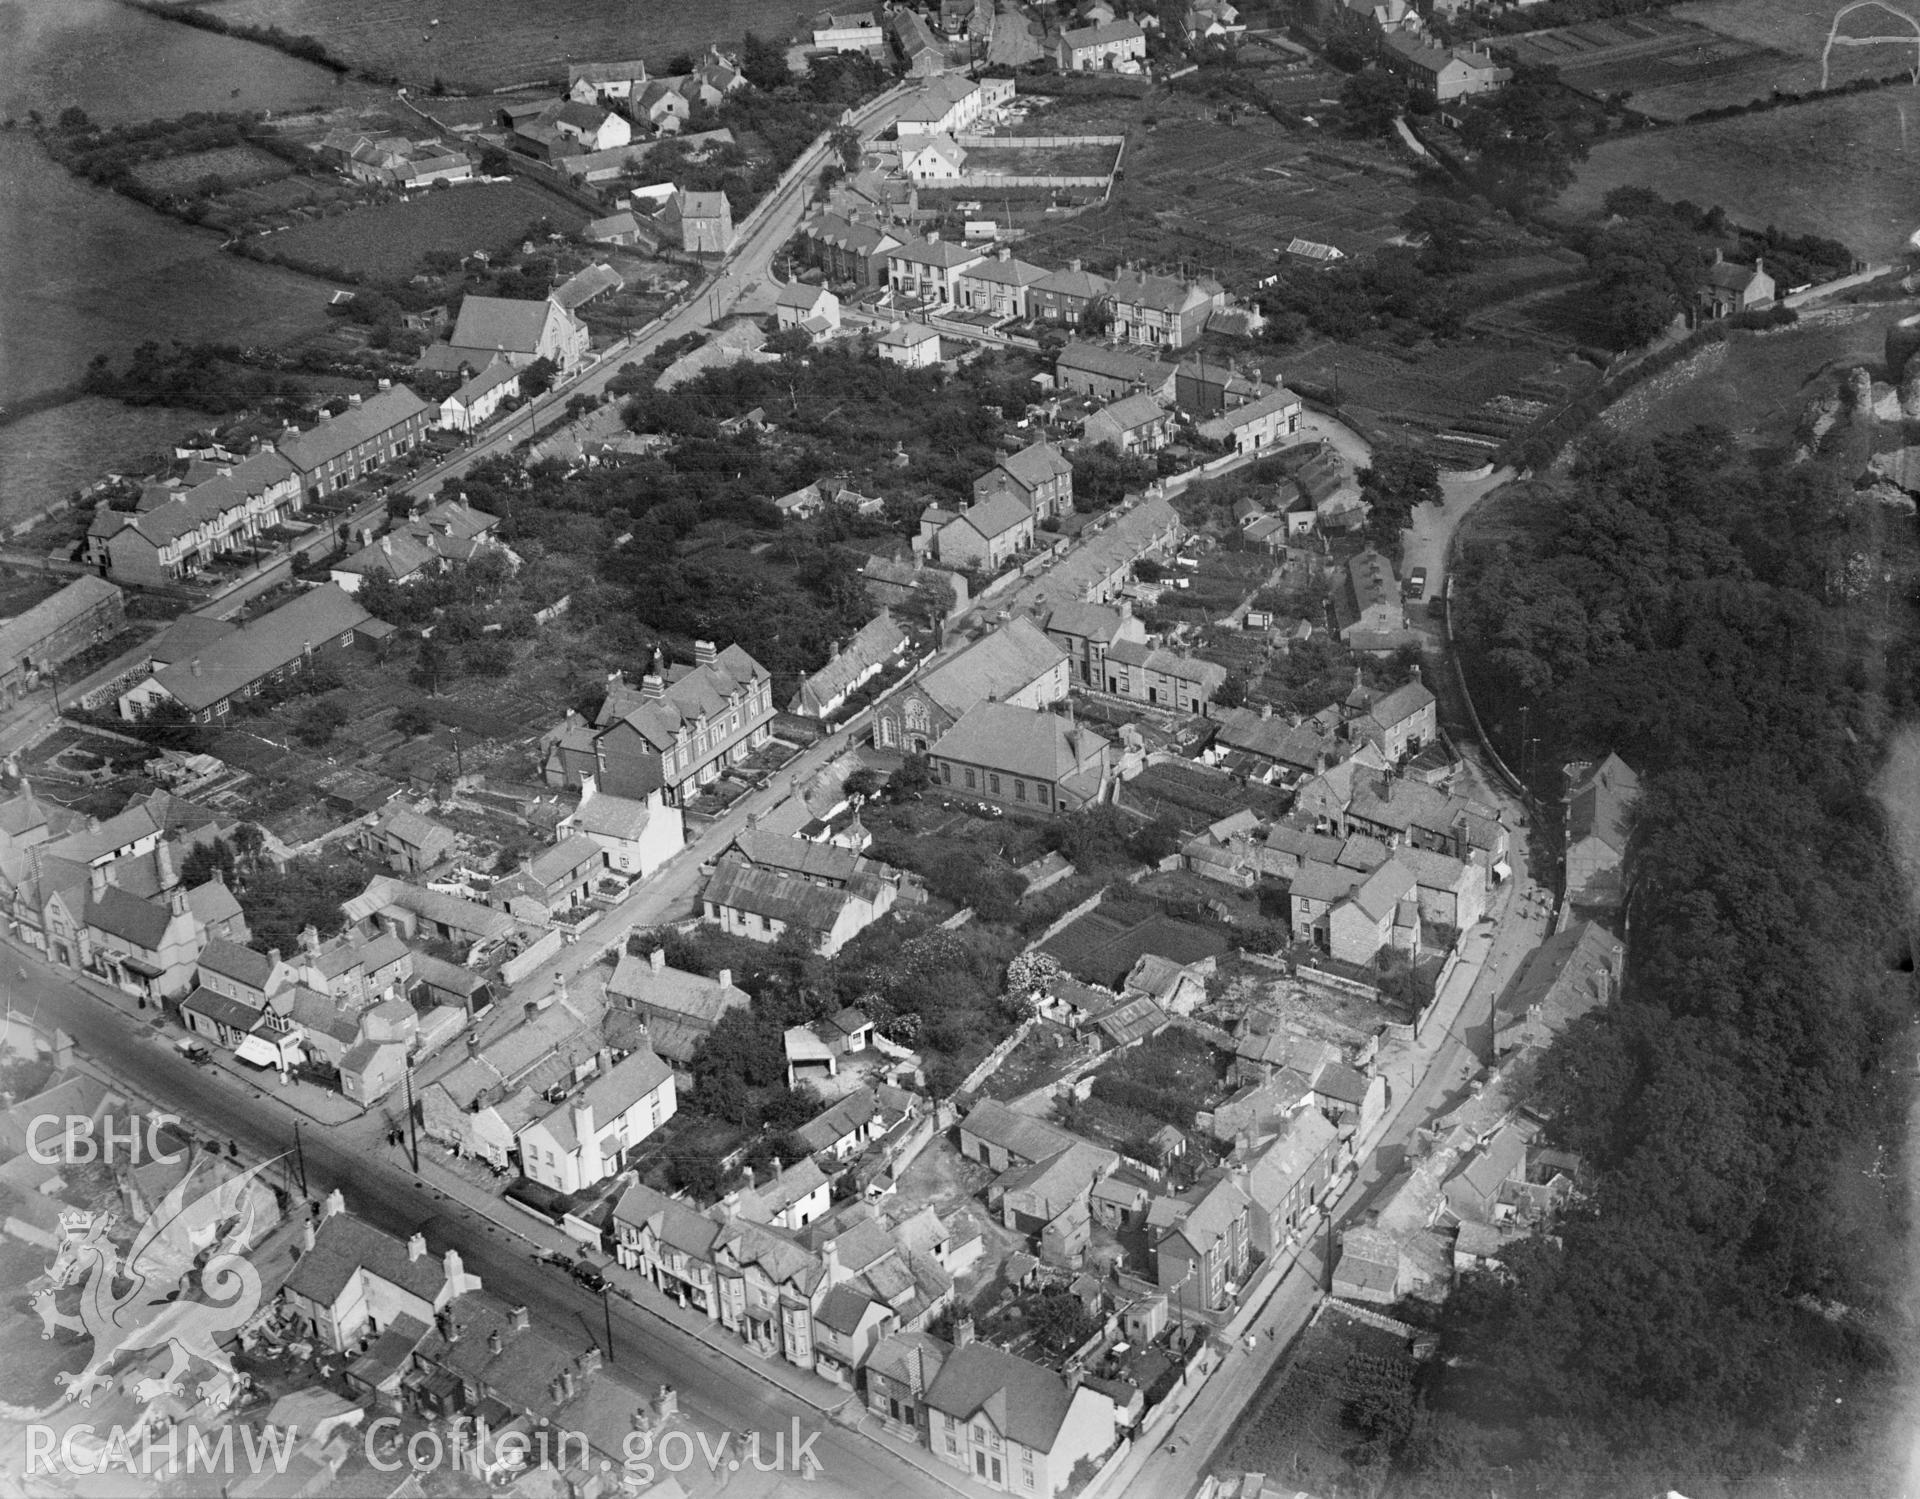 General view of Rhuddlan, oblique aerial view. 5?x4? black and white glass plate negative.